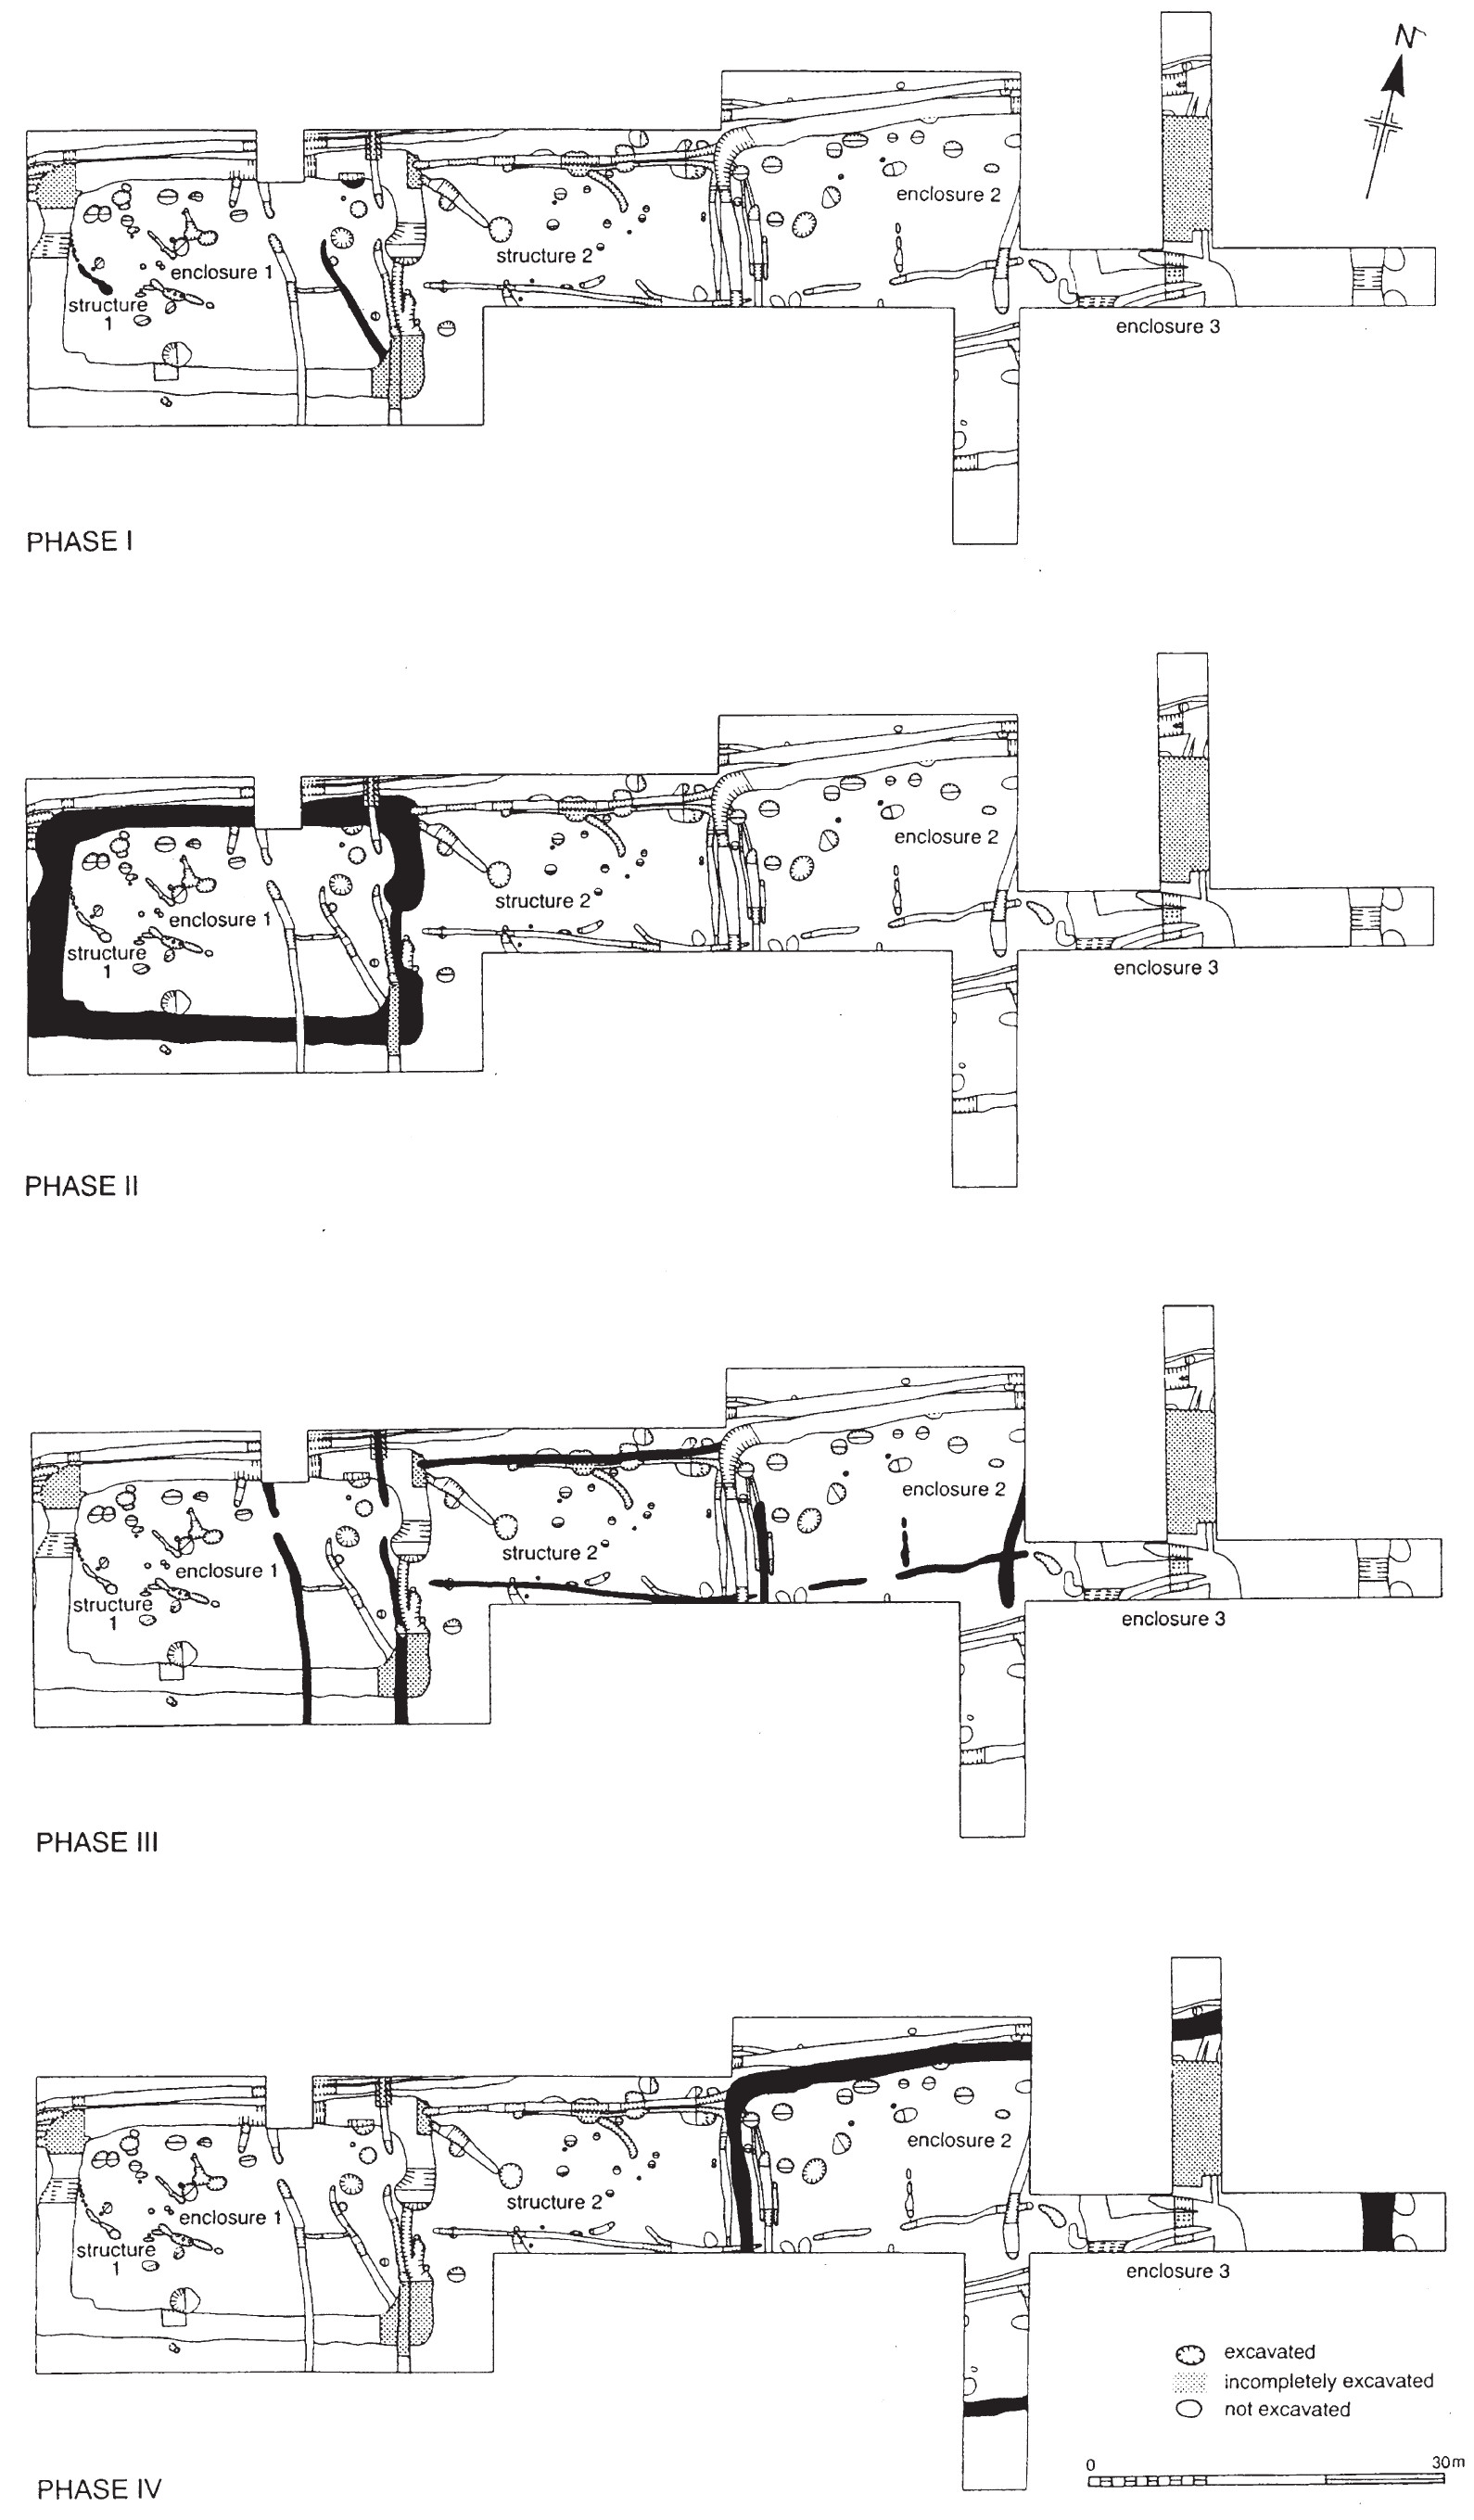 Four diagrams showing activity on a site from four different time periods. The site is roughly 120m long and comprises several overlaid structures and enclosures.